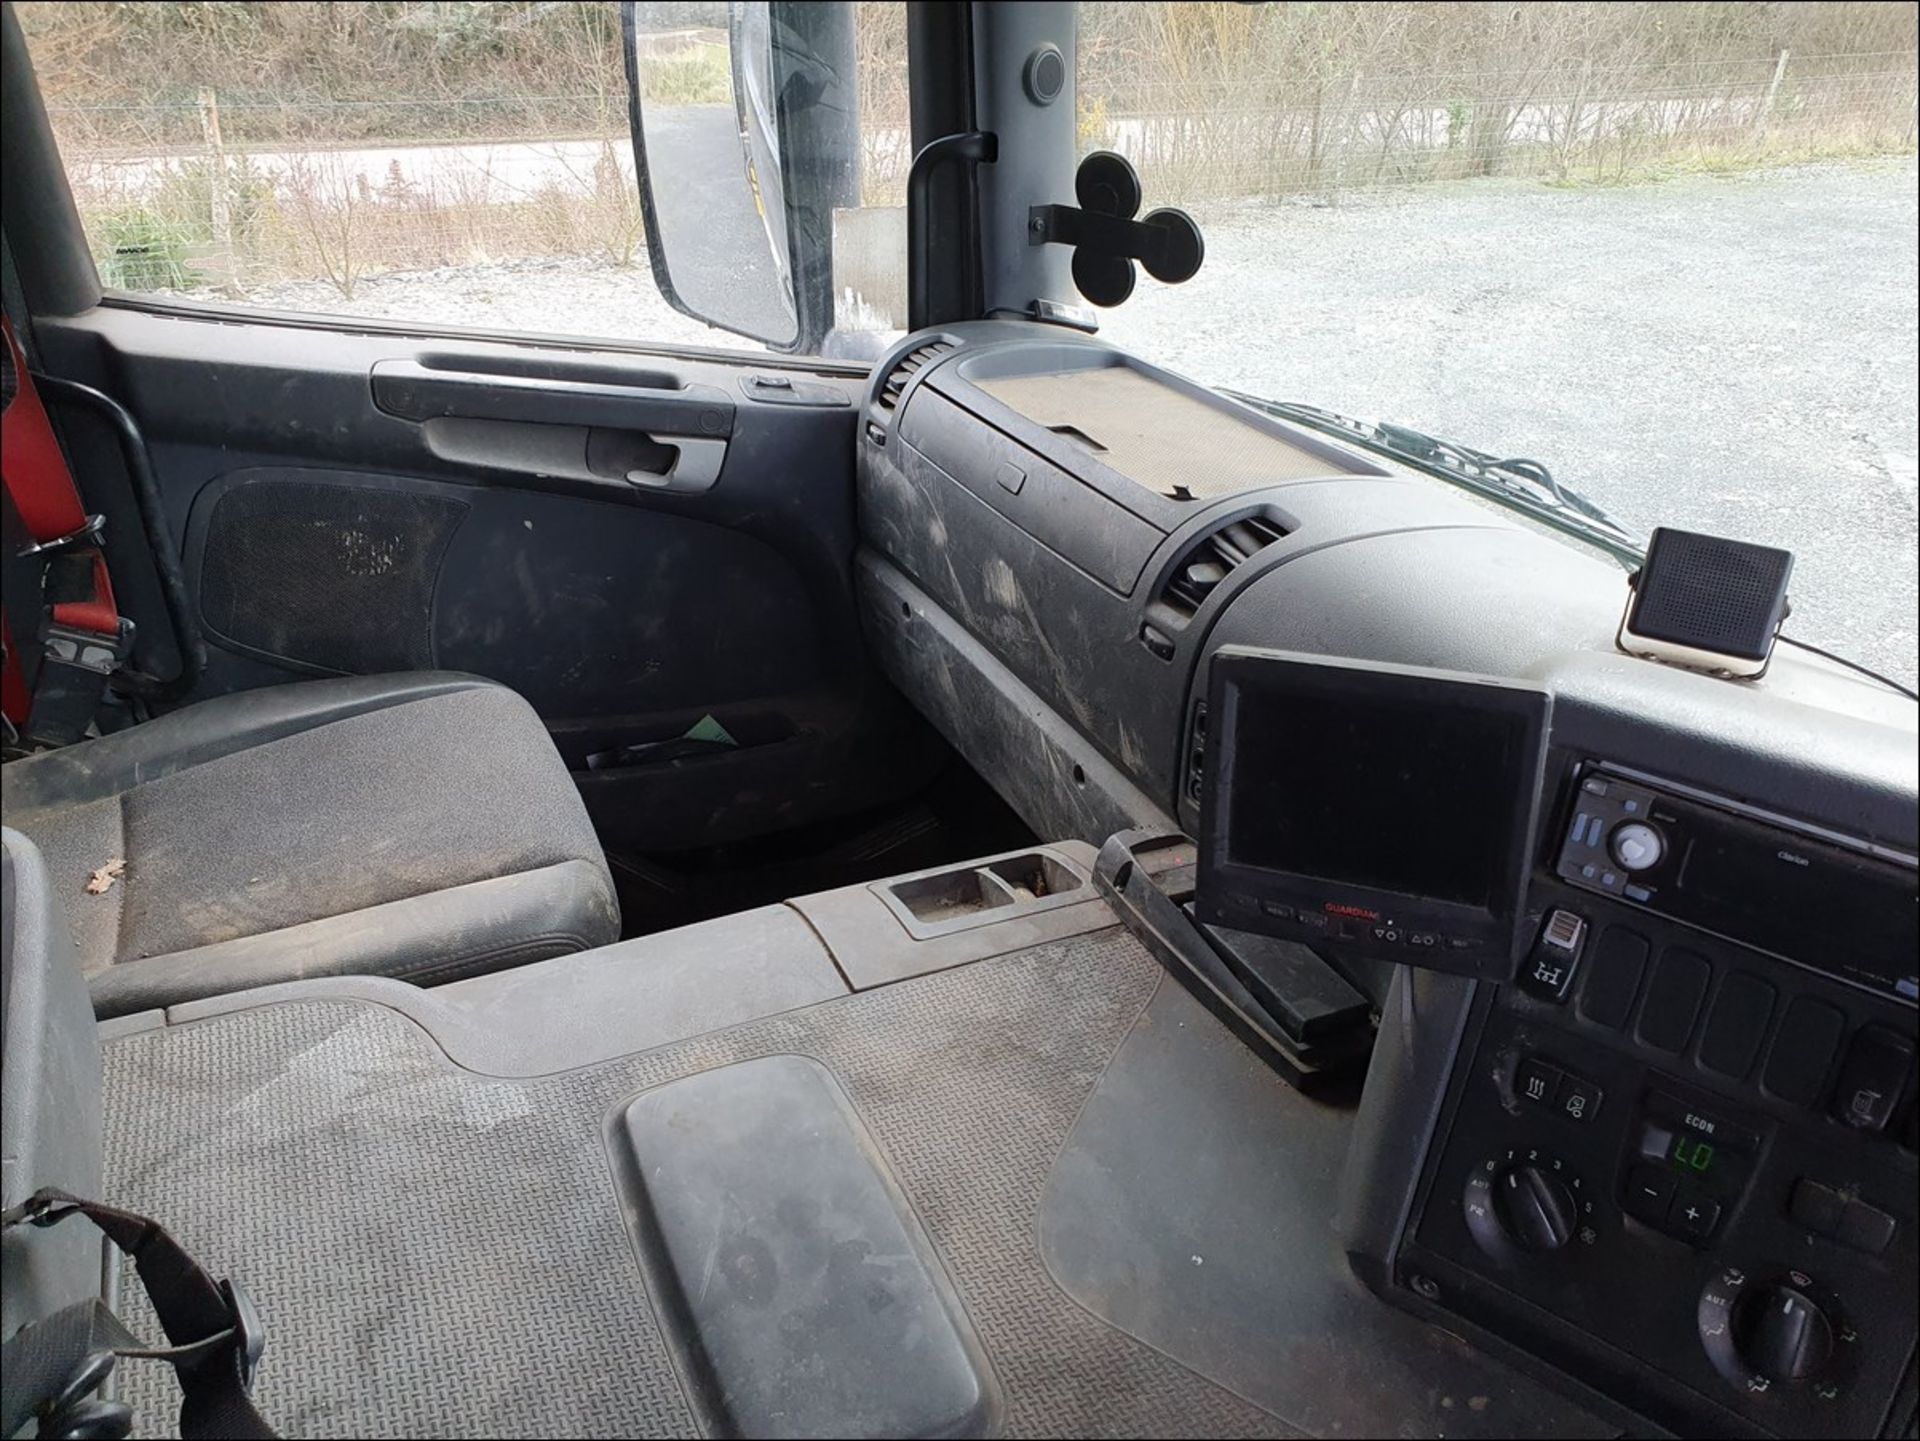 06/56 SCANIA P-SRS D-CLASS - 8970cc 2dr Flat Bed (Black) - Image 18 of 19